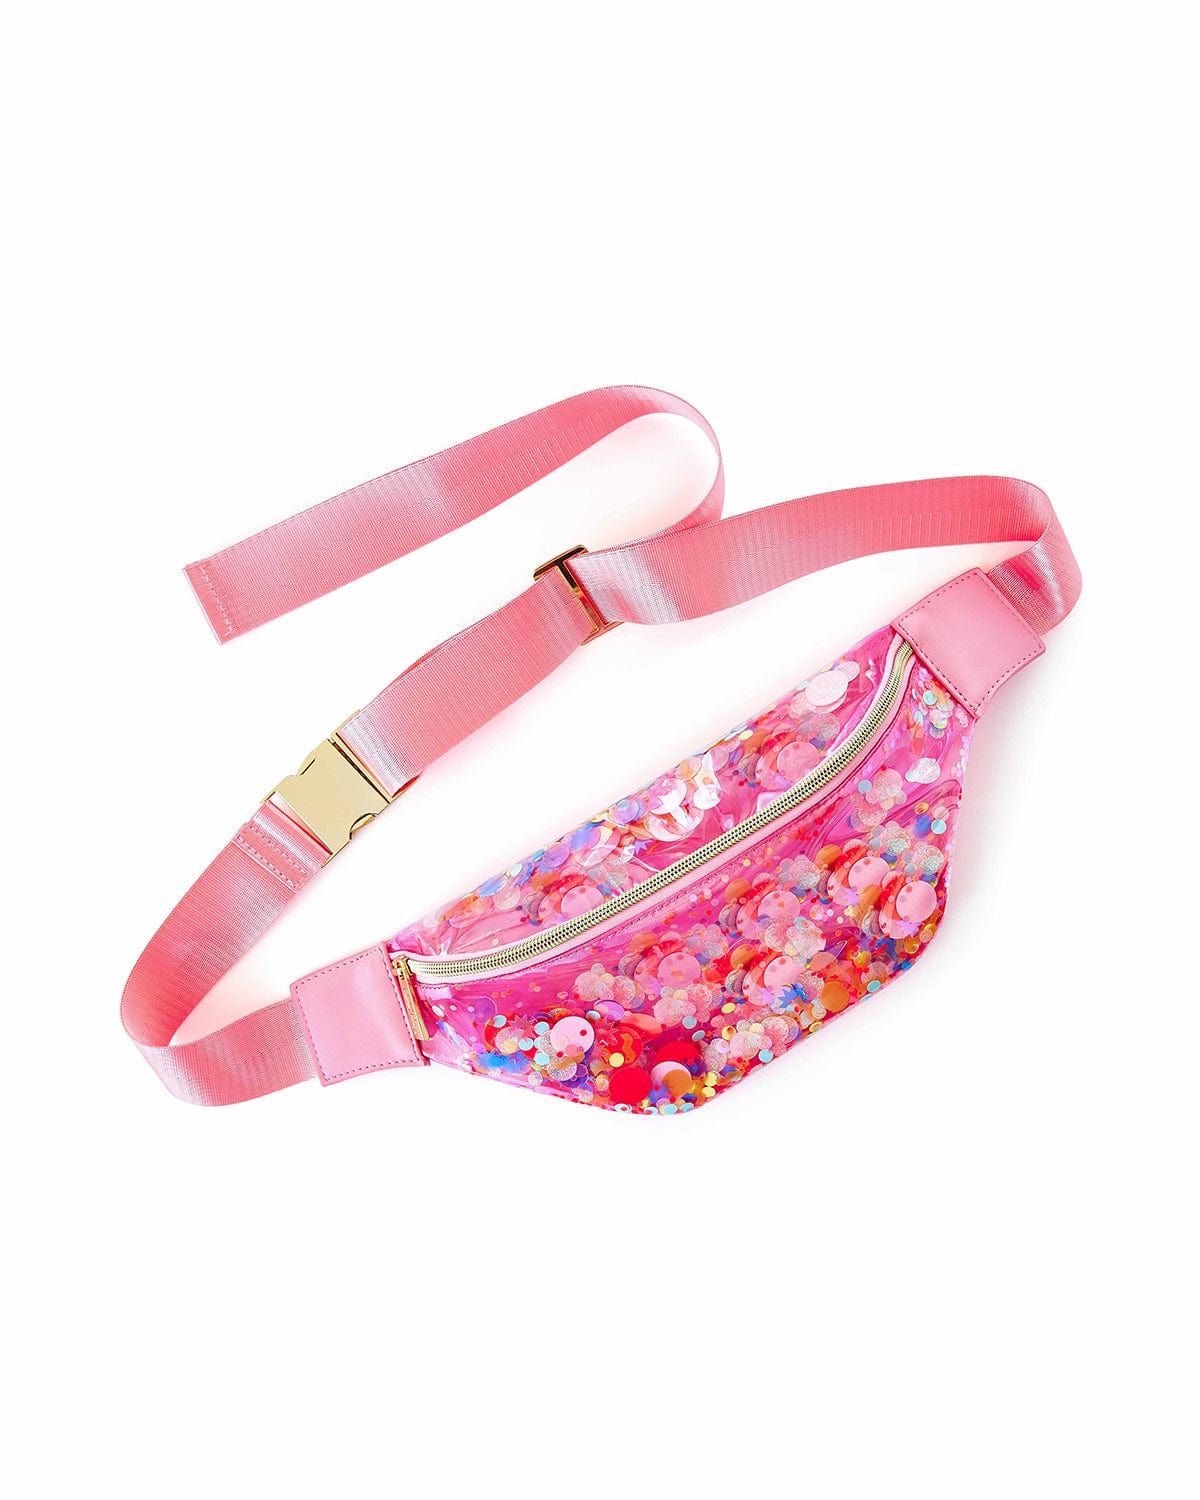 Bring On The Fun Clear Confetti Belt Bag Fanny Pack | Packed Party